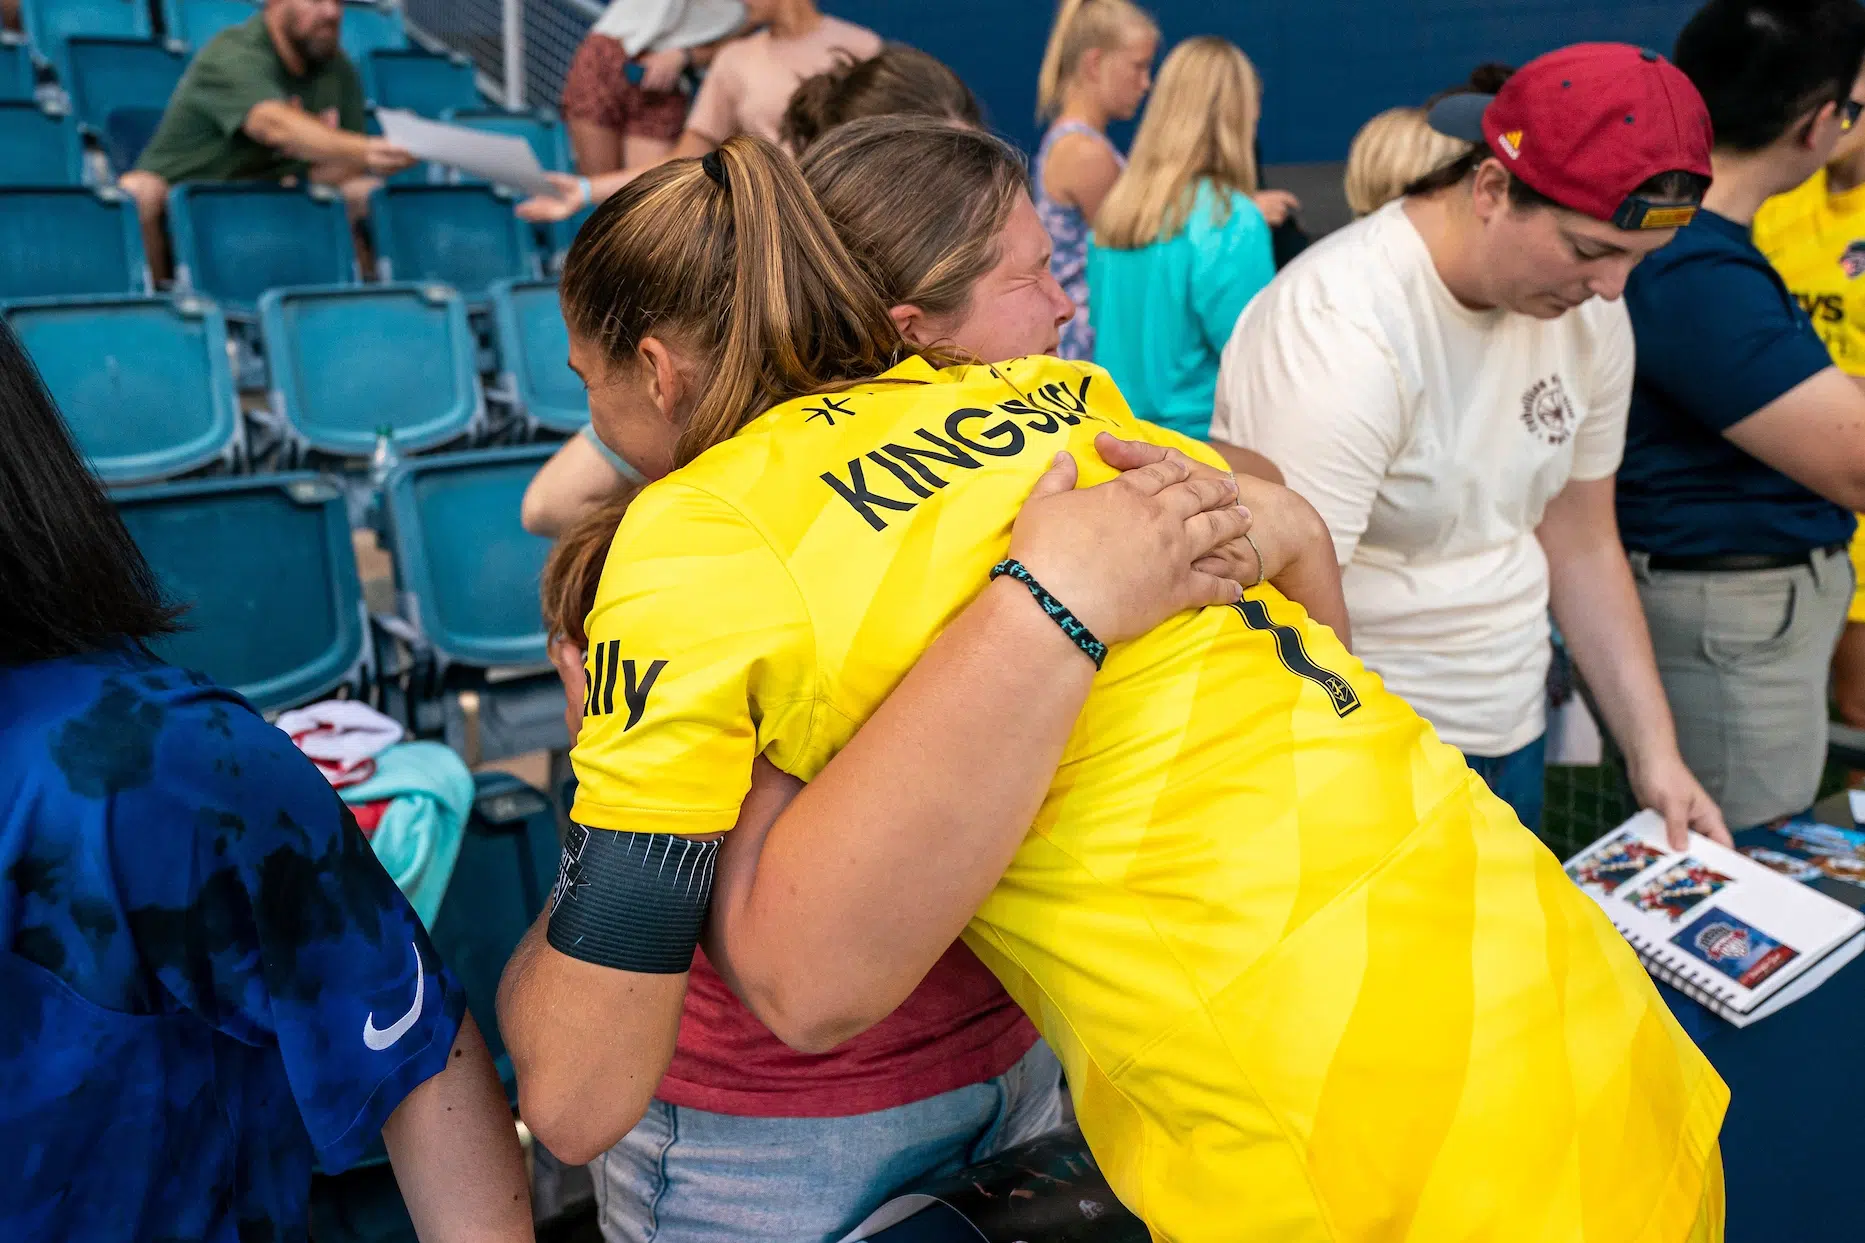 Aubrey Kingsbury in a yellow jersey hugs a fan in a red shirt who closes her eyes to hold in tears.